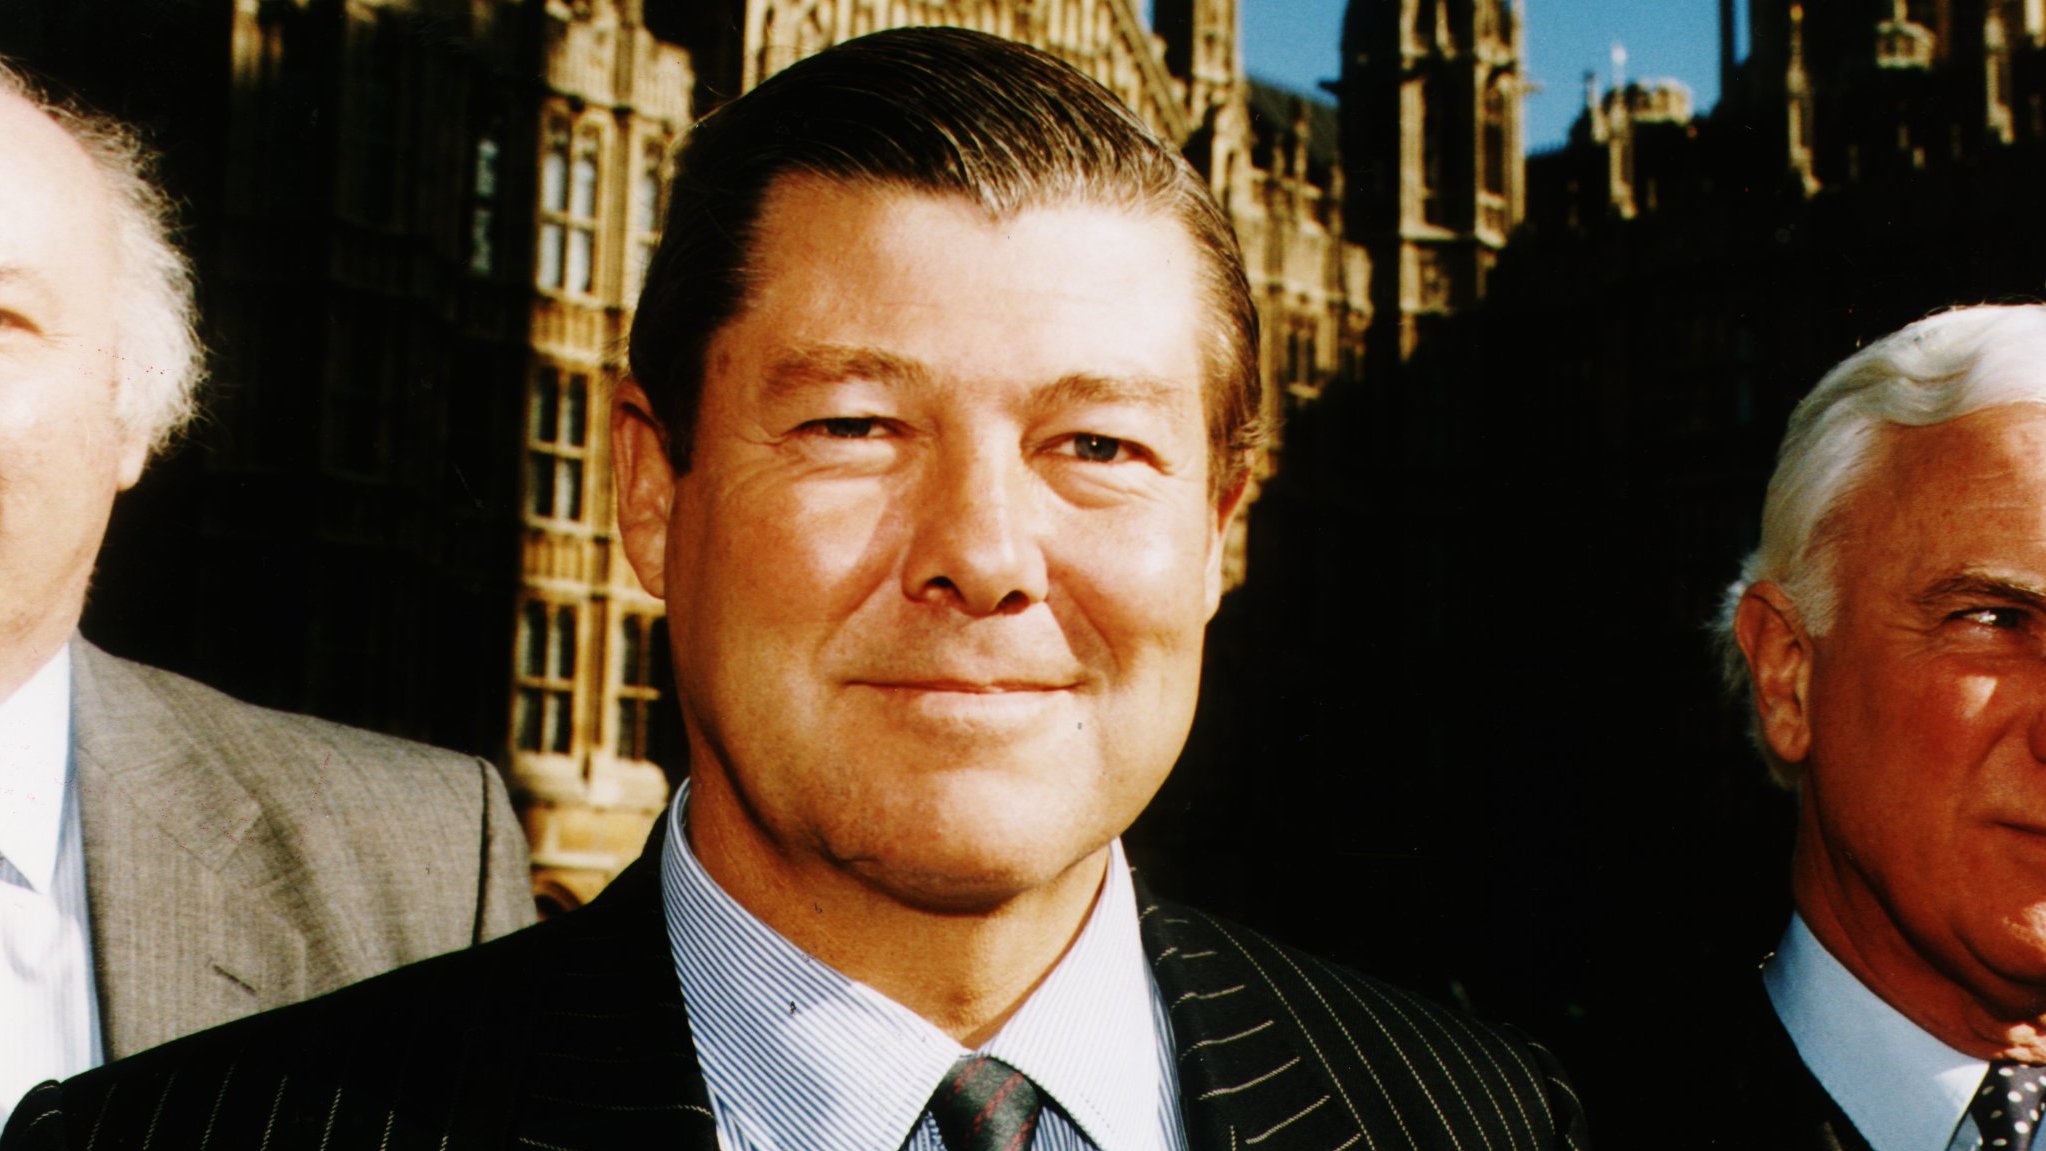 Bonsor in 1995, when he was minister for foreign affairs